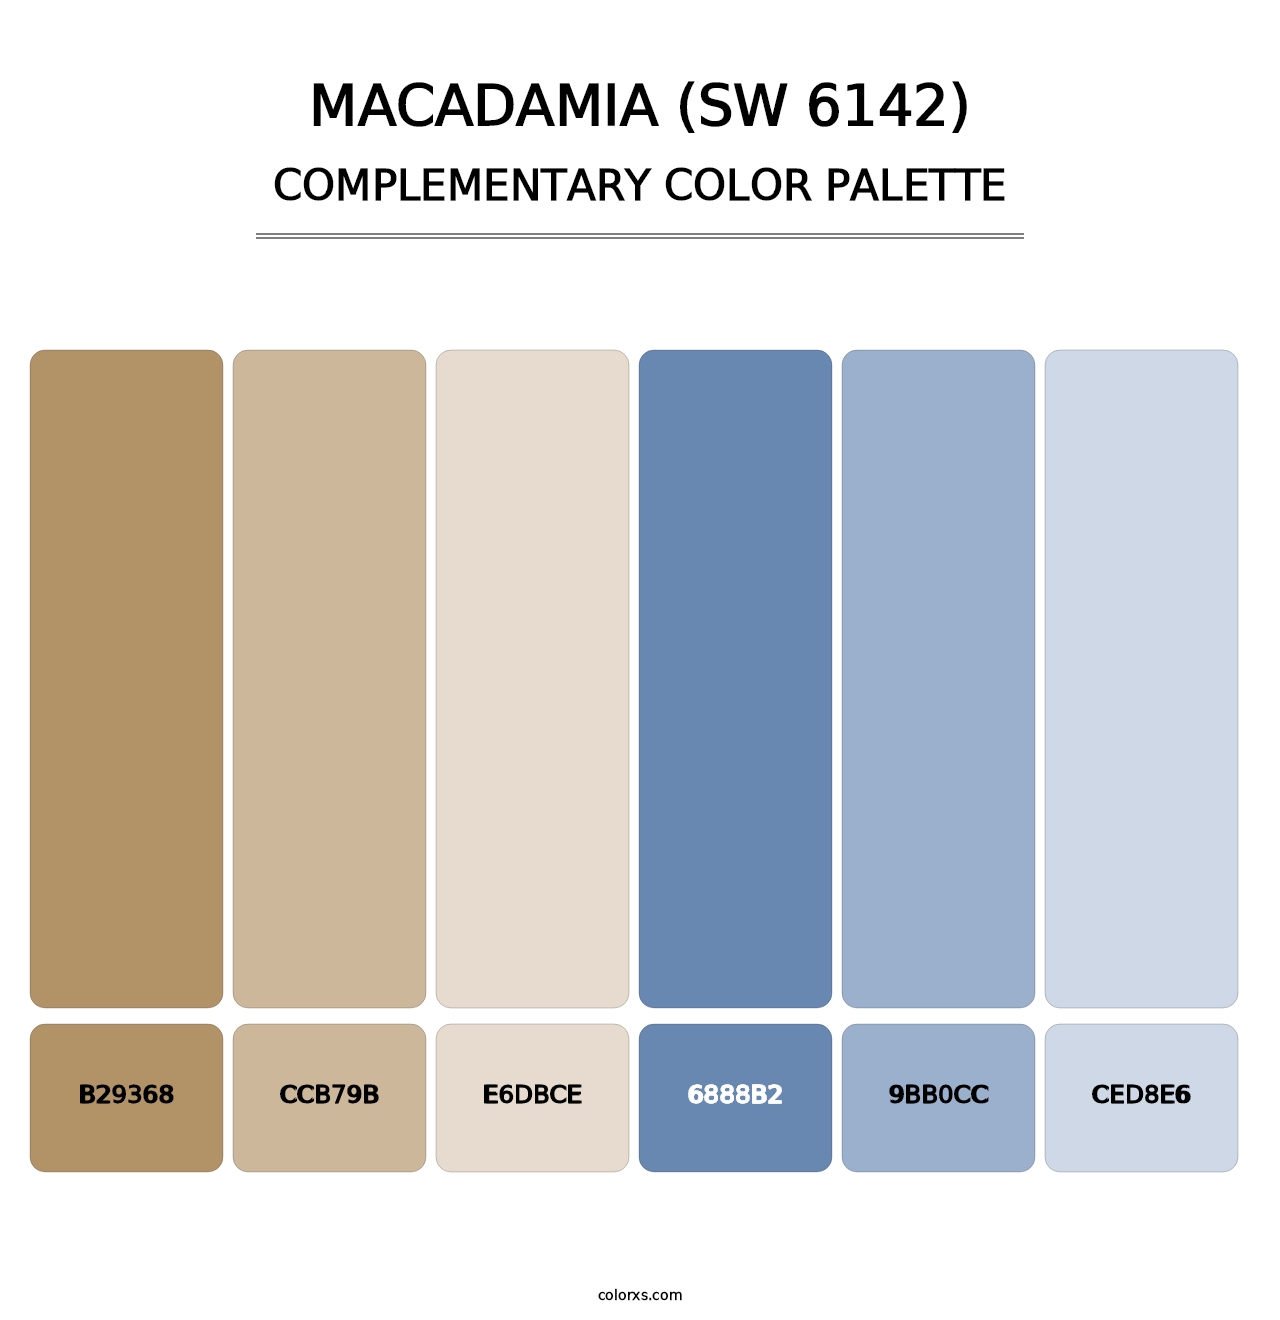 Macadamia (SW 6142) - Complementary Color Palette